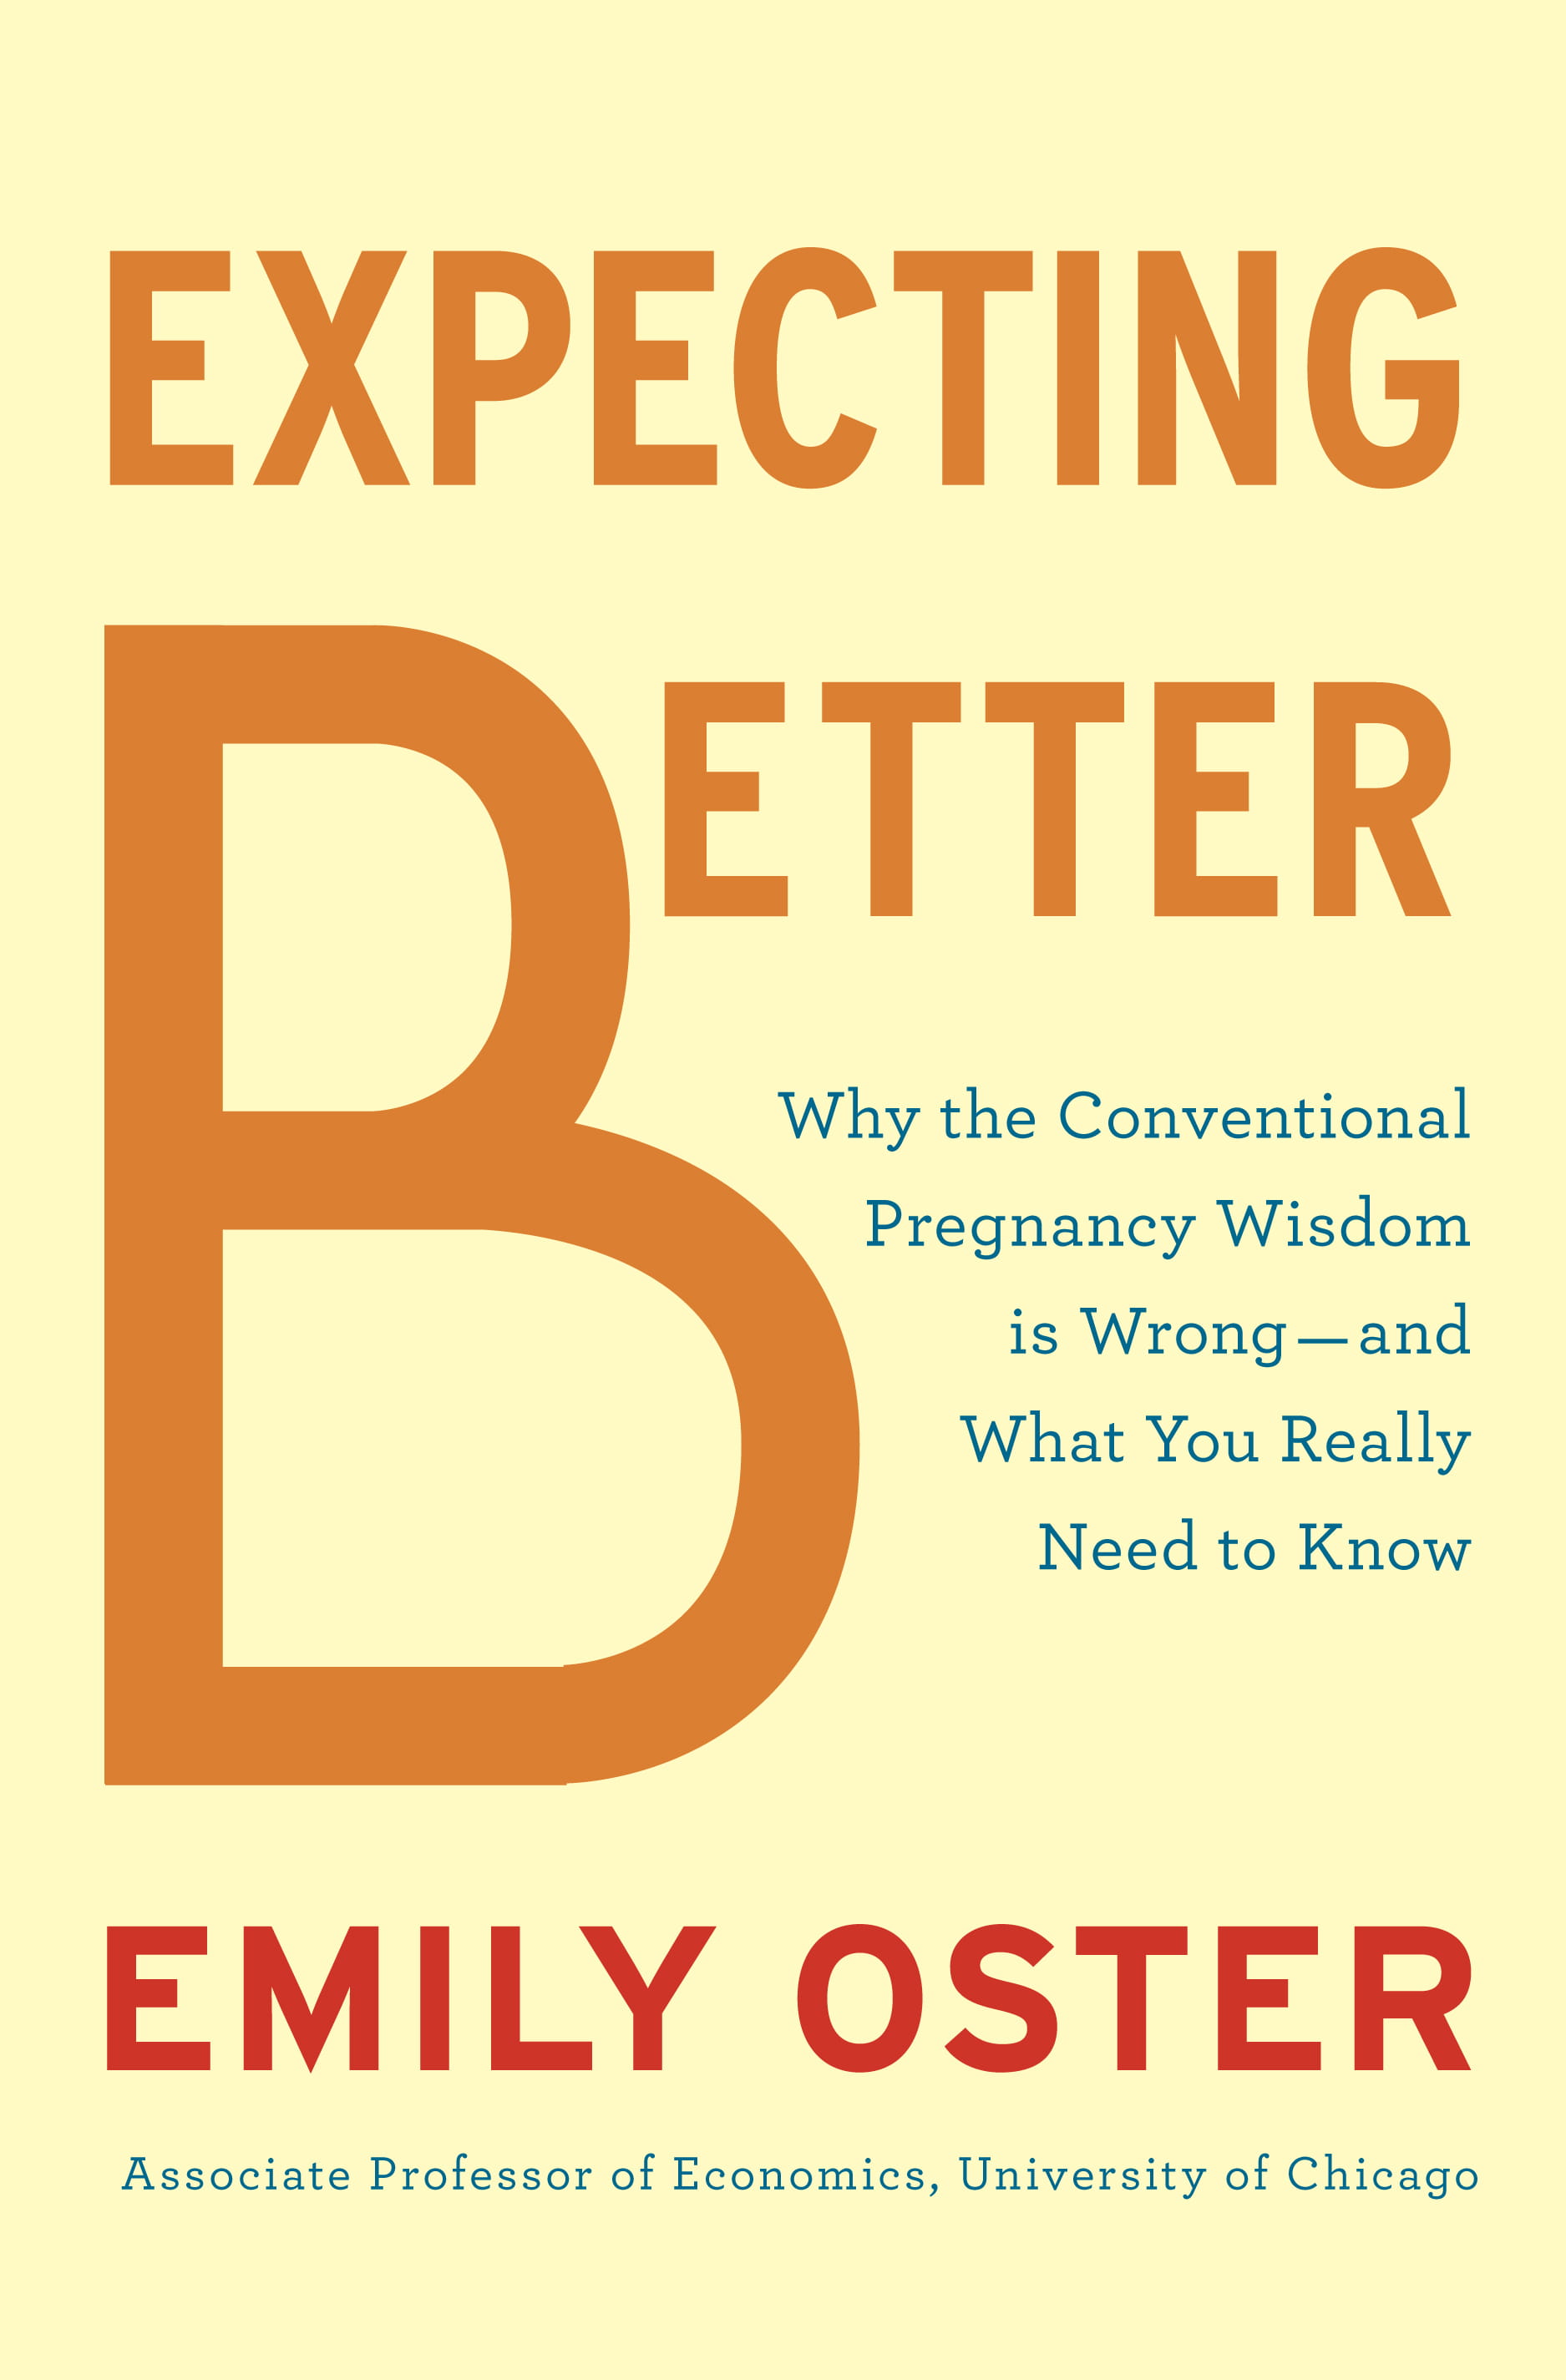 Cover of the book "Expecting Better" by Emily Oster